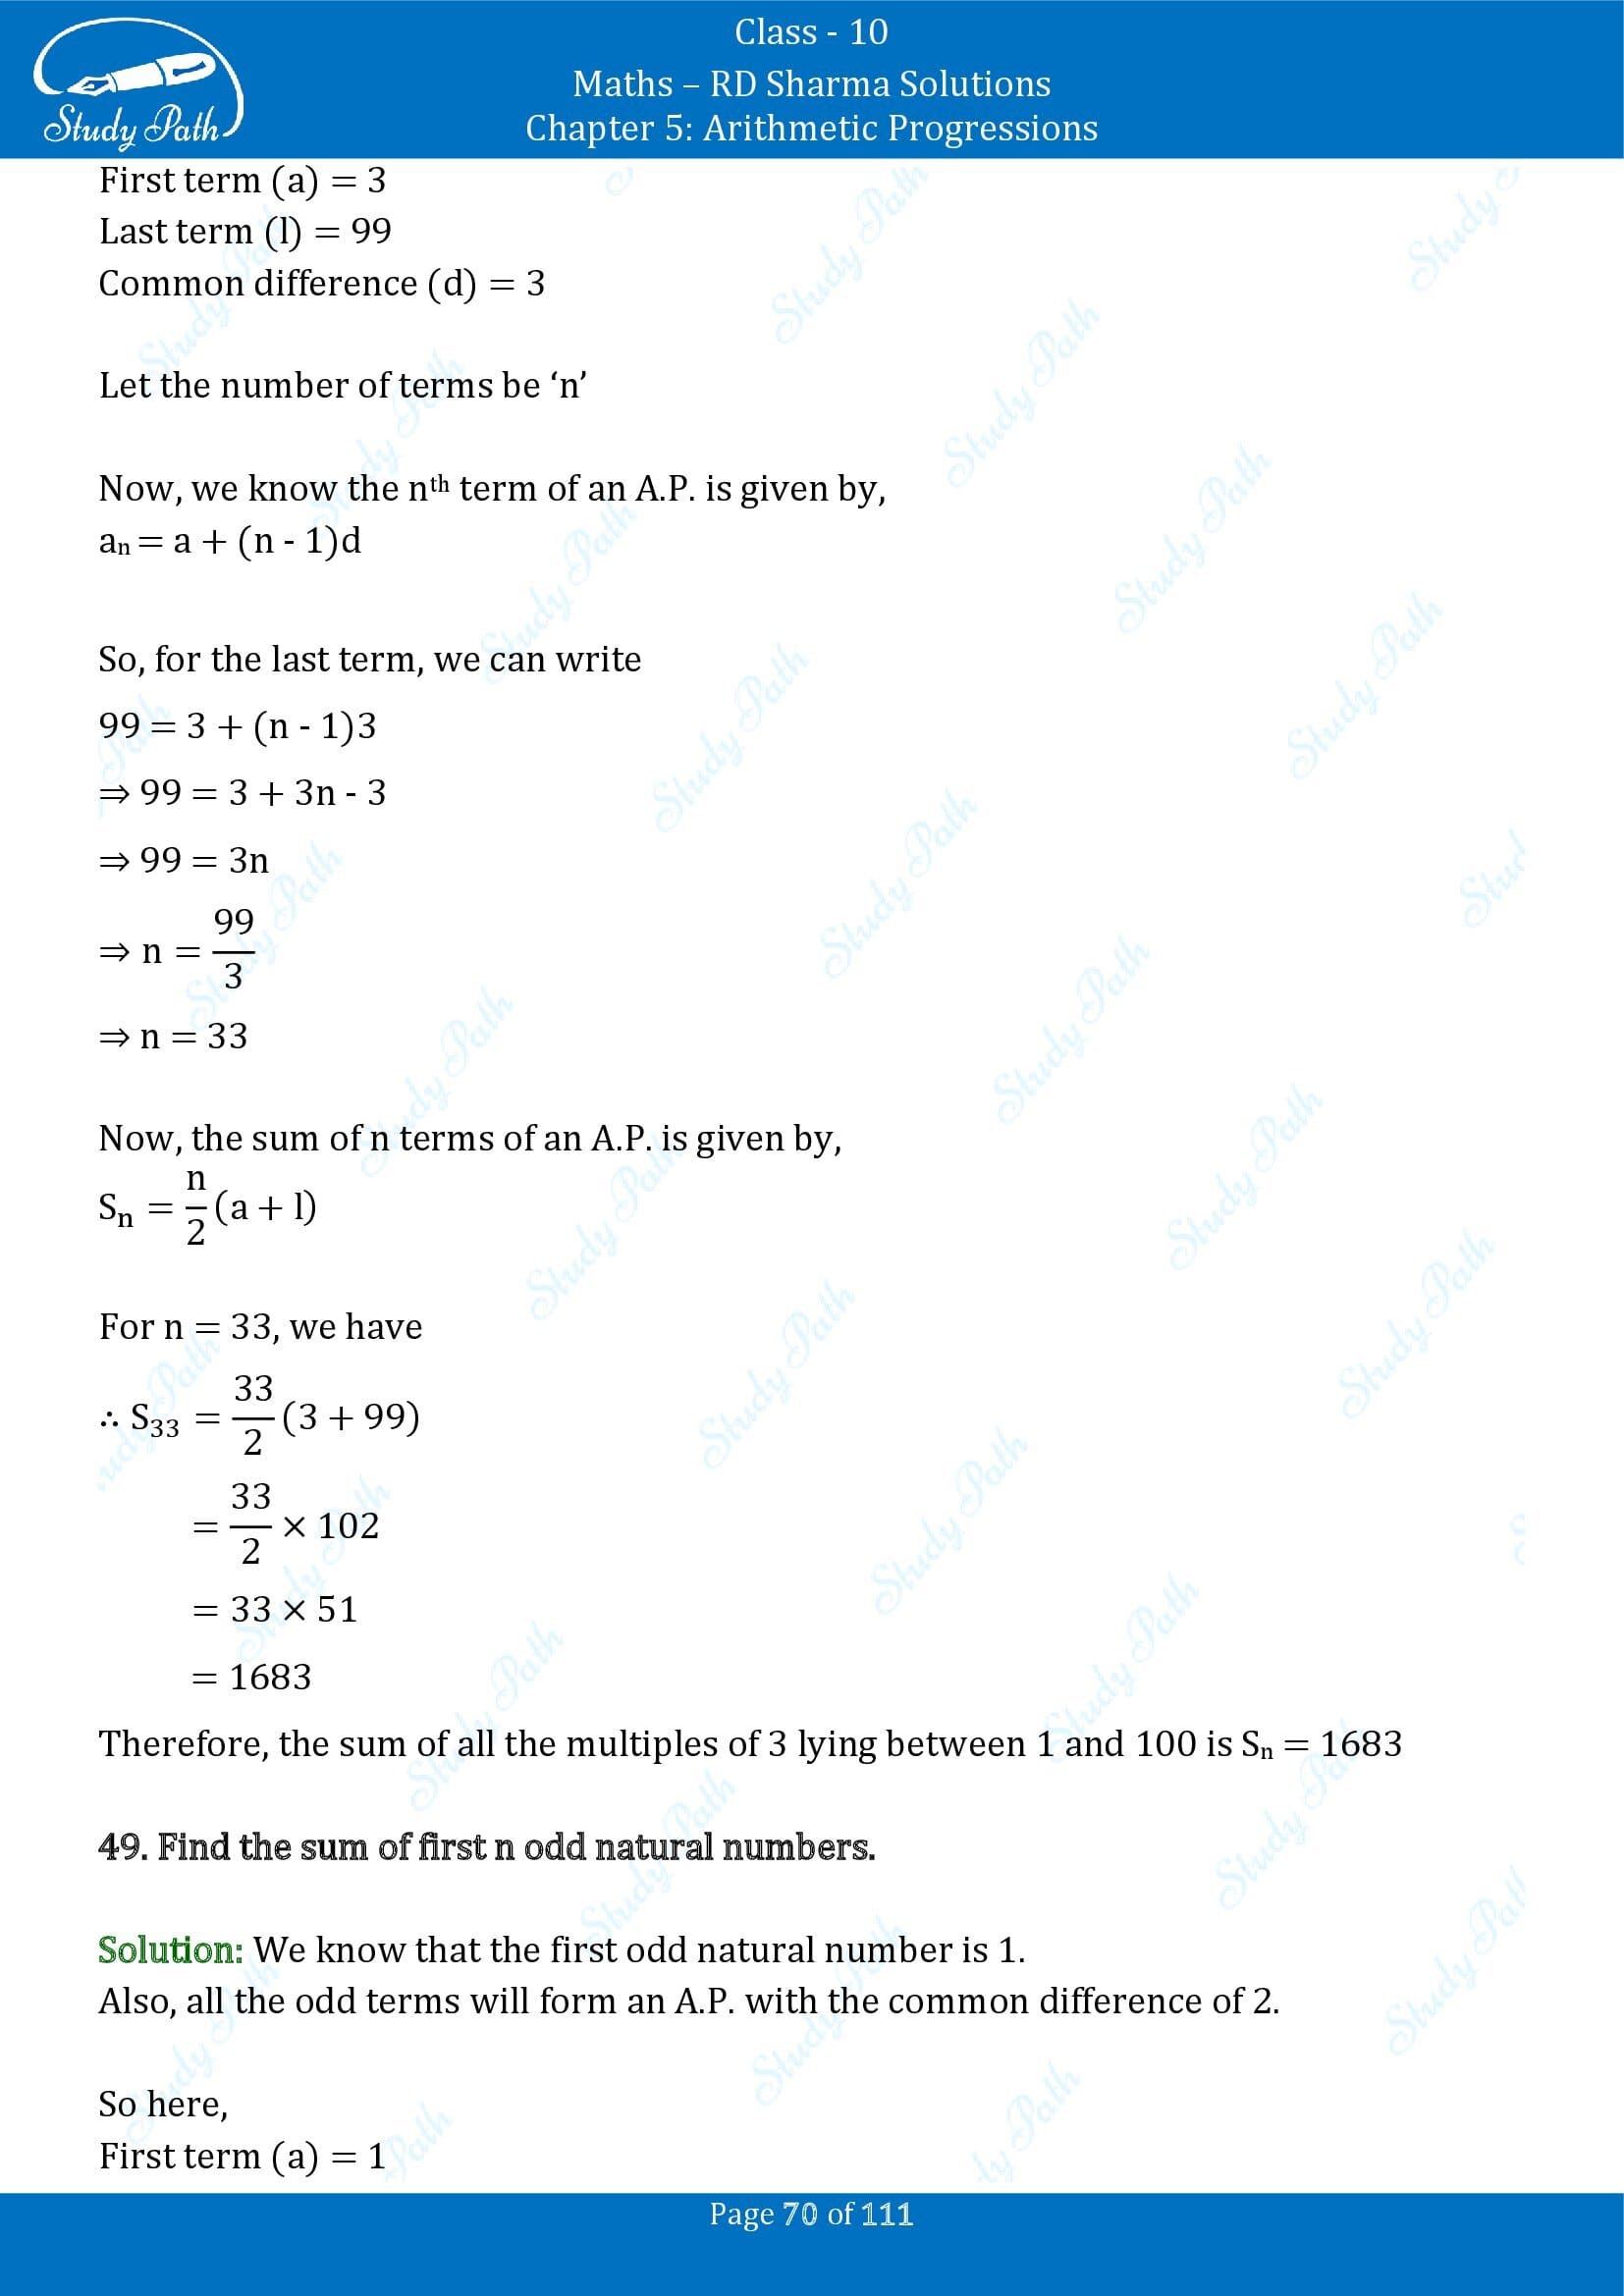 RD Sharma Solutions Class 10 Chapter 5 Arithmetic Progressions Exercise 5.6 00070